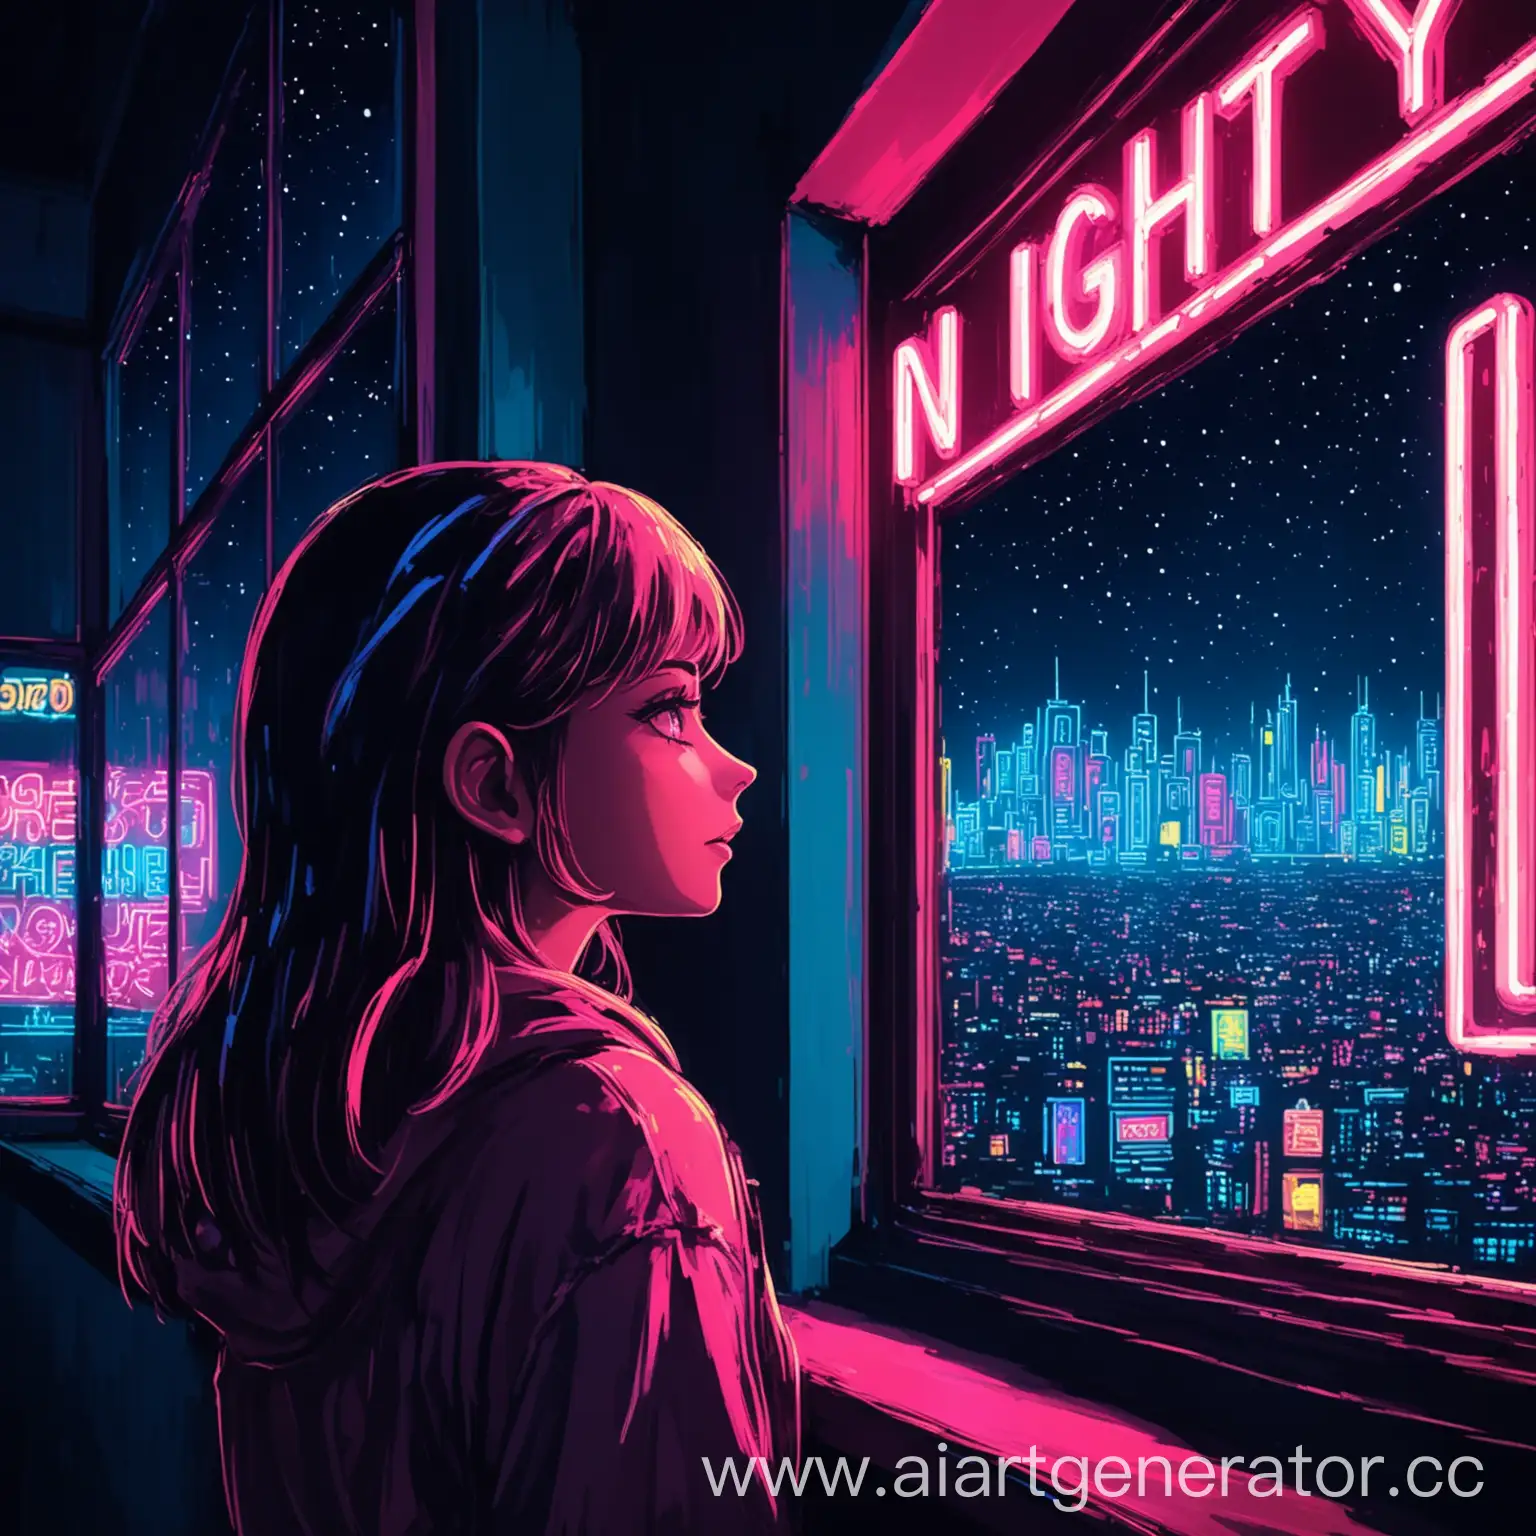 The girl looks out the window and sees the night city in neon signs